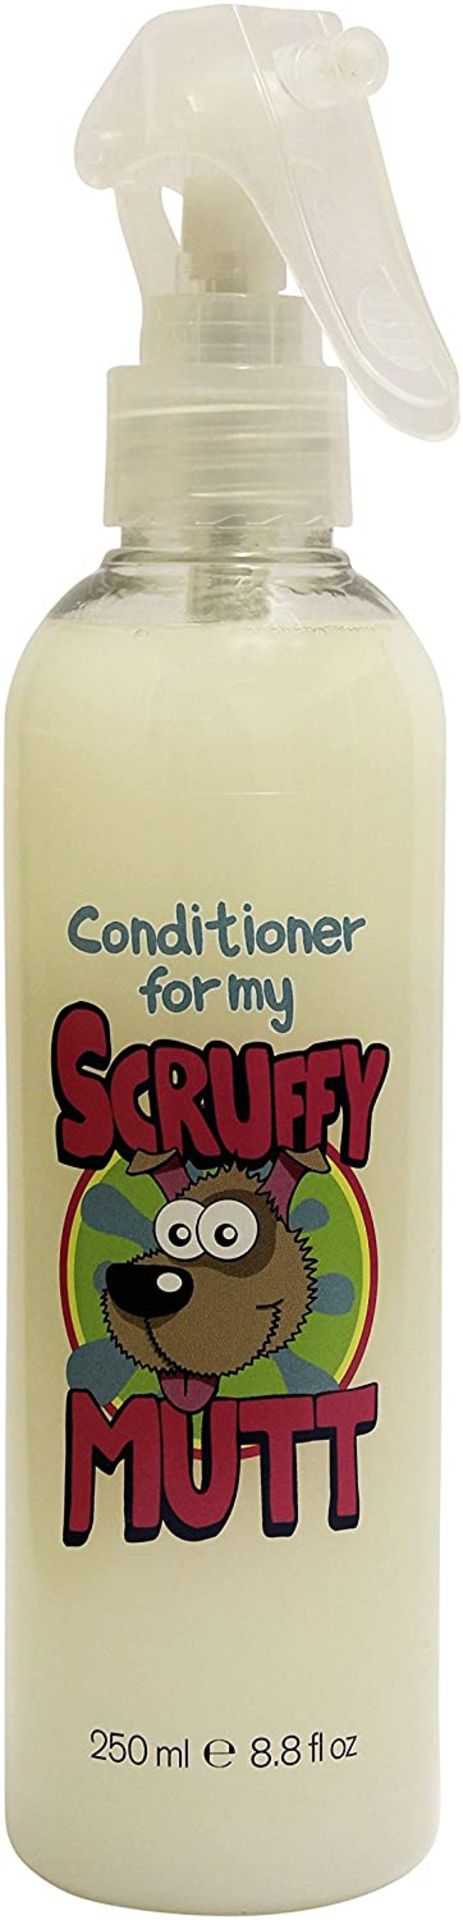 Pack Of 6 Scruffy Mutt - Conditioner - New & Packaged.